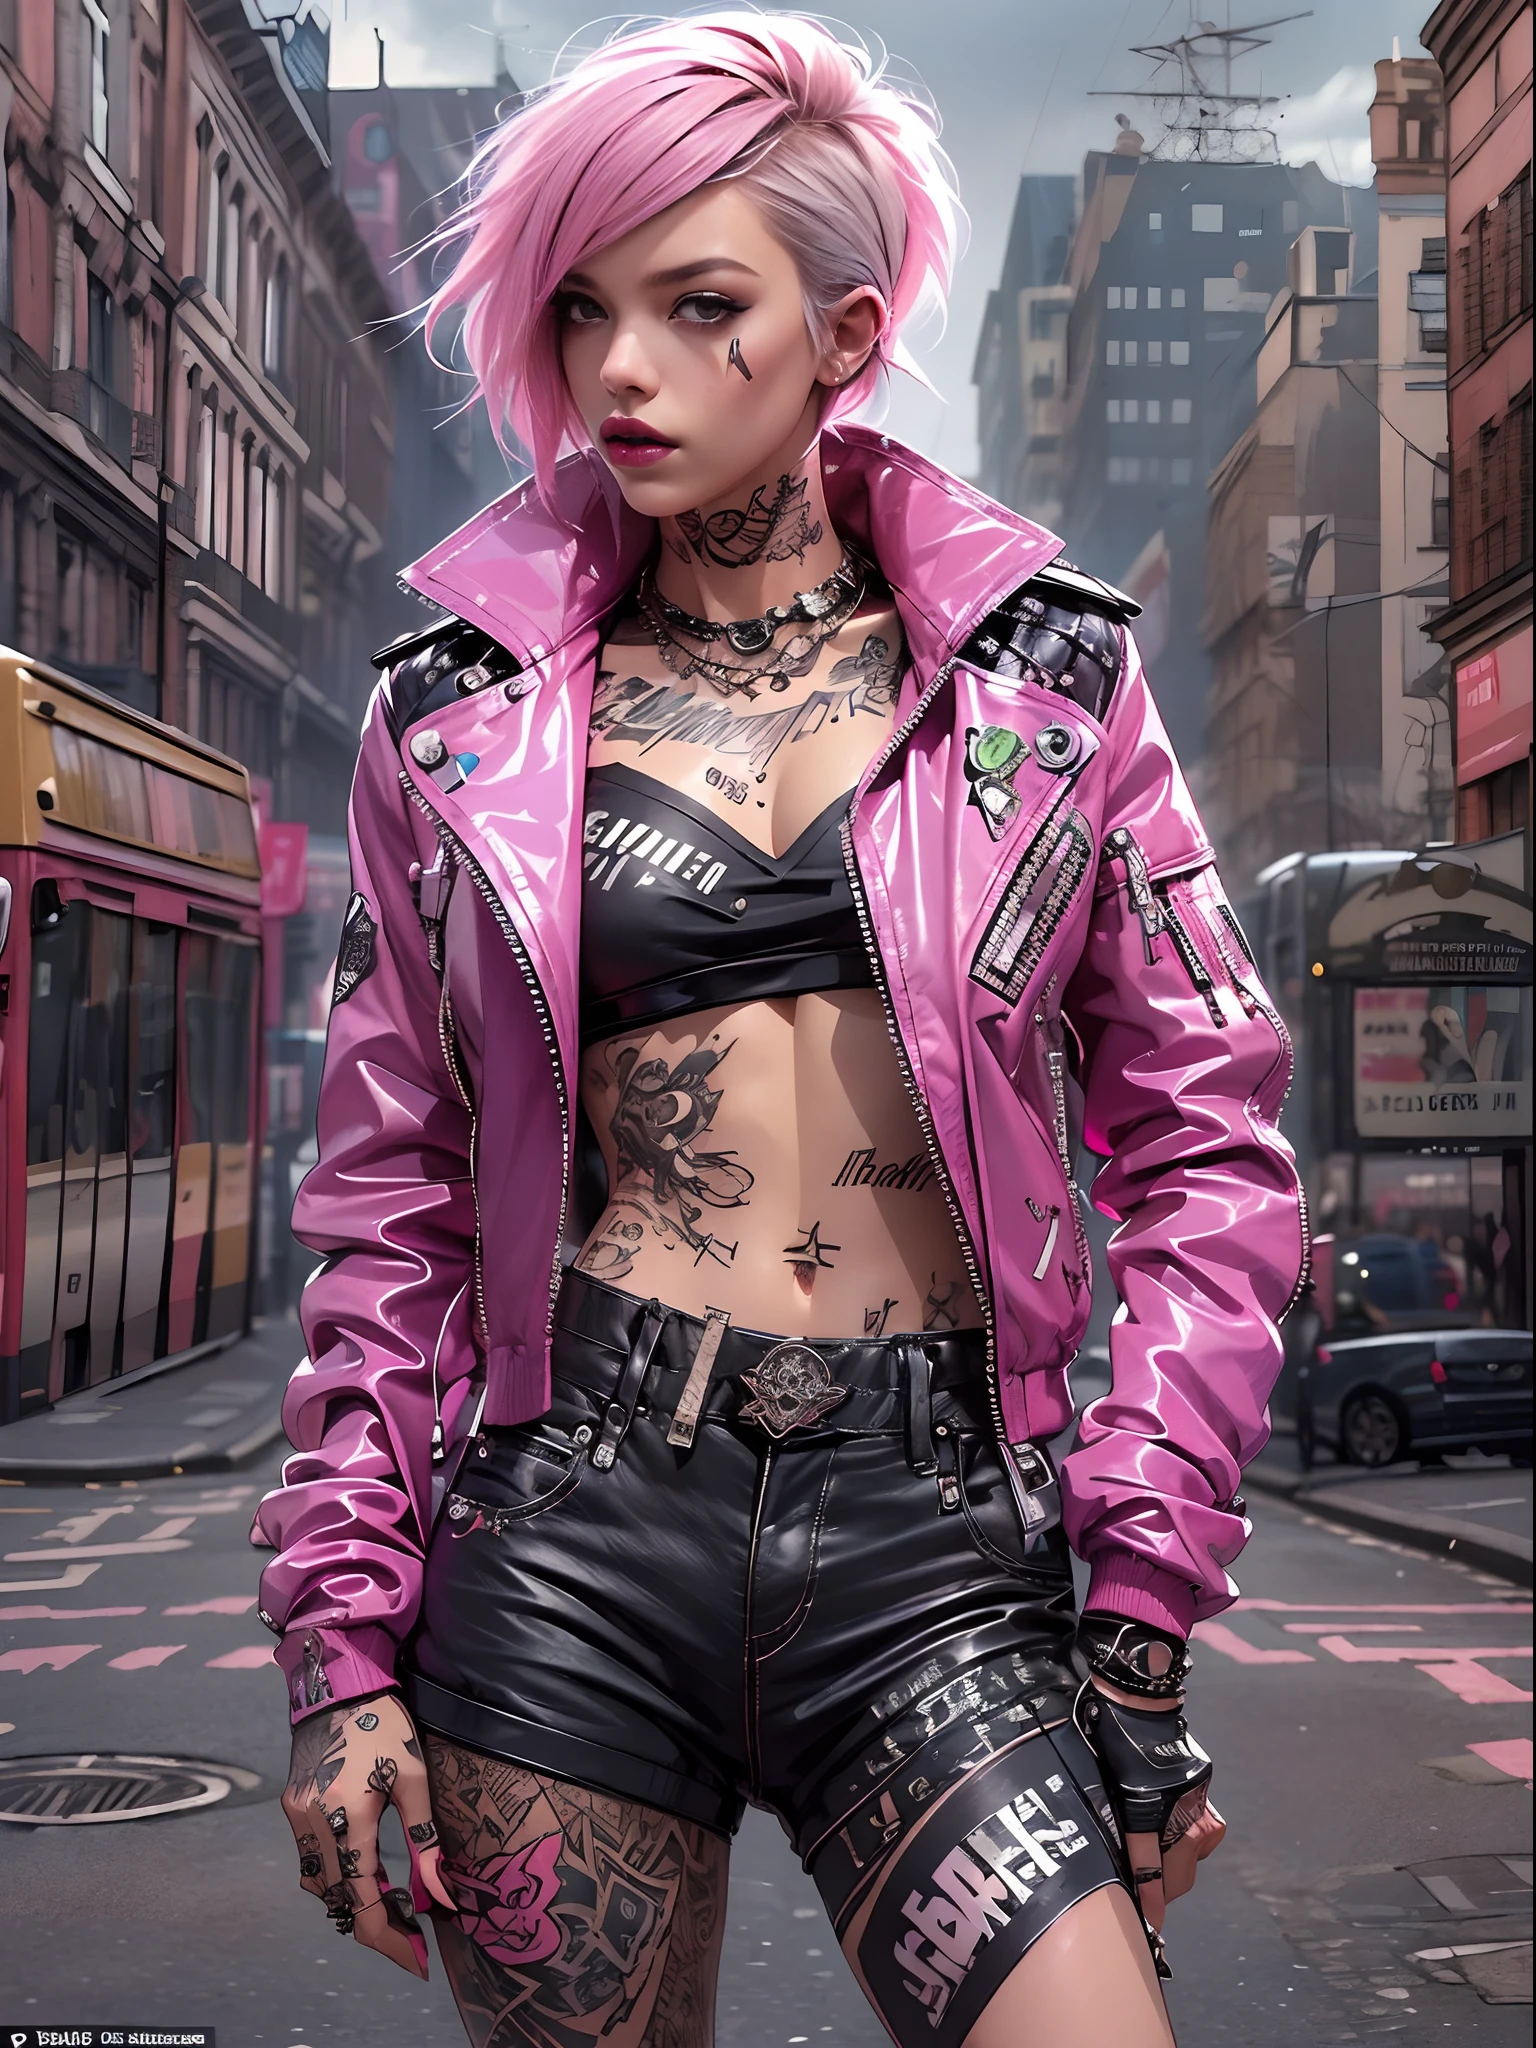 (((of the highest quality: 1.4))),(unparalleled masterpiece ever), (Ultra high definition),(Ultra-realistic 8K CG), offcial art、 (((adult body))), (((1girl in))), ((( Bob Shorthair ))), Punk girl with a perfect body, Jacket with metal spines,Beautiful and well-groomed face,,Detailed punk fashion,leather jackets, (Image from head to thigh),((Pink Bob Shorthair )), Small leather panties, Simon Bisley's urban savage style,Detailed street background of London,Clean abs, Complex graphics, dark pink with white stars and gray and white stripes,,,, (( Many poisonous tattoos )), piercings,